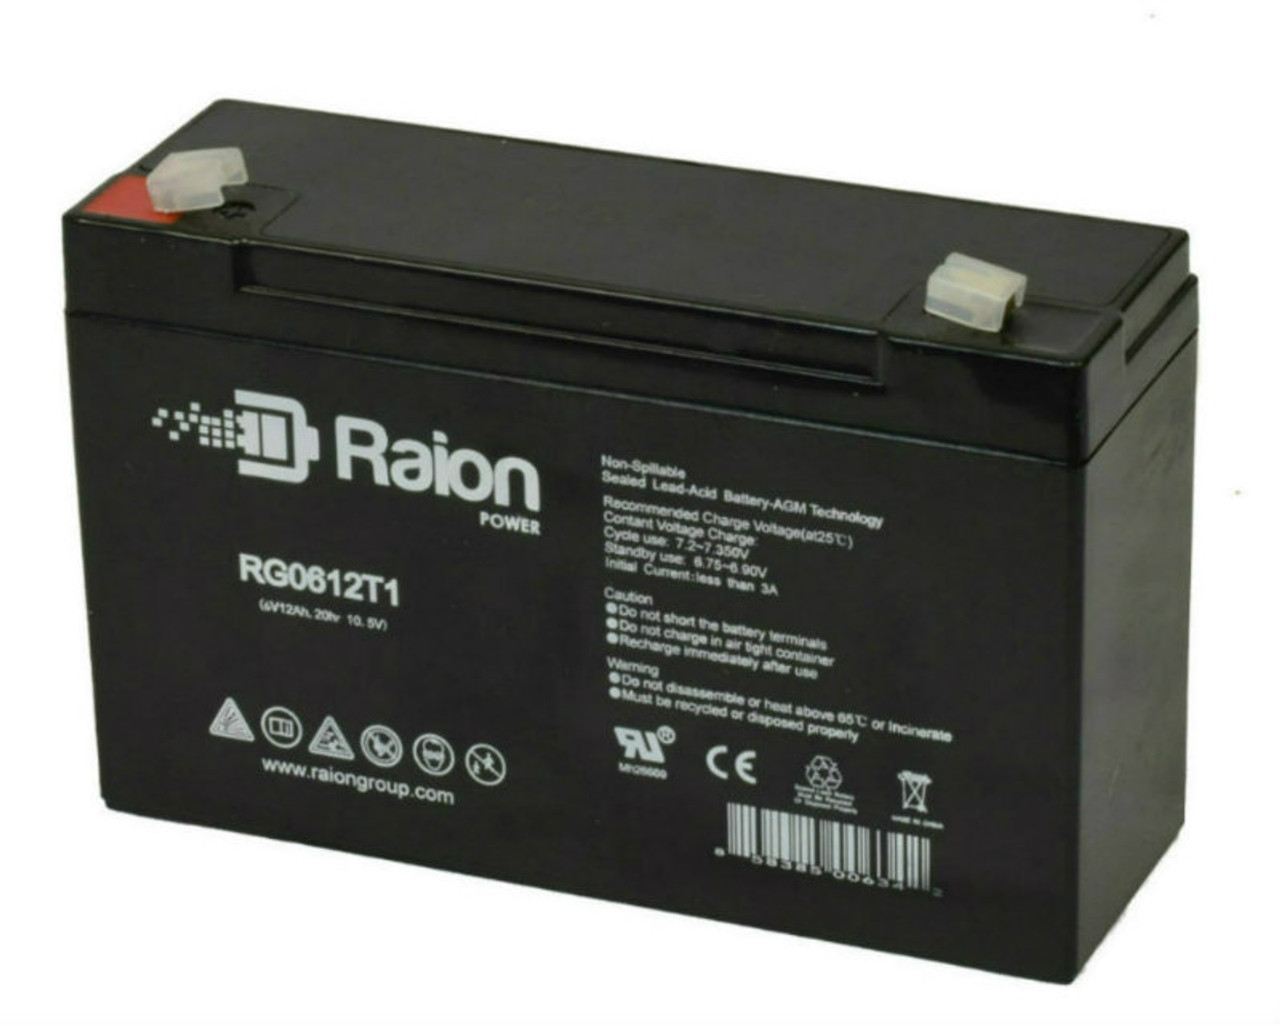 Raion Power RG06120T1 Replacement Battery for Power Kingdom PS12-6